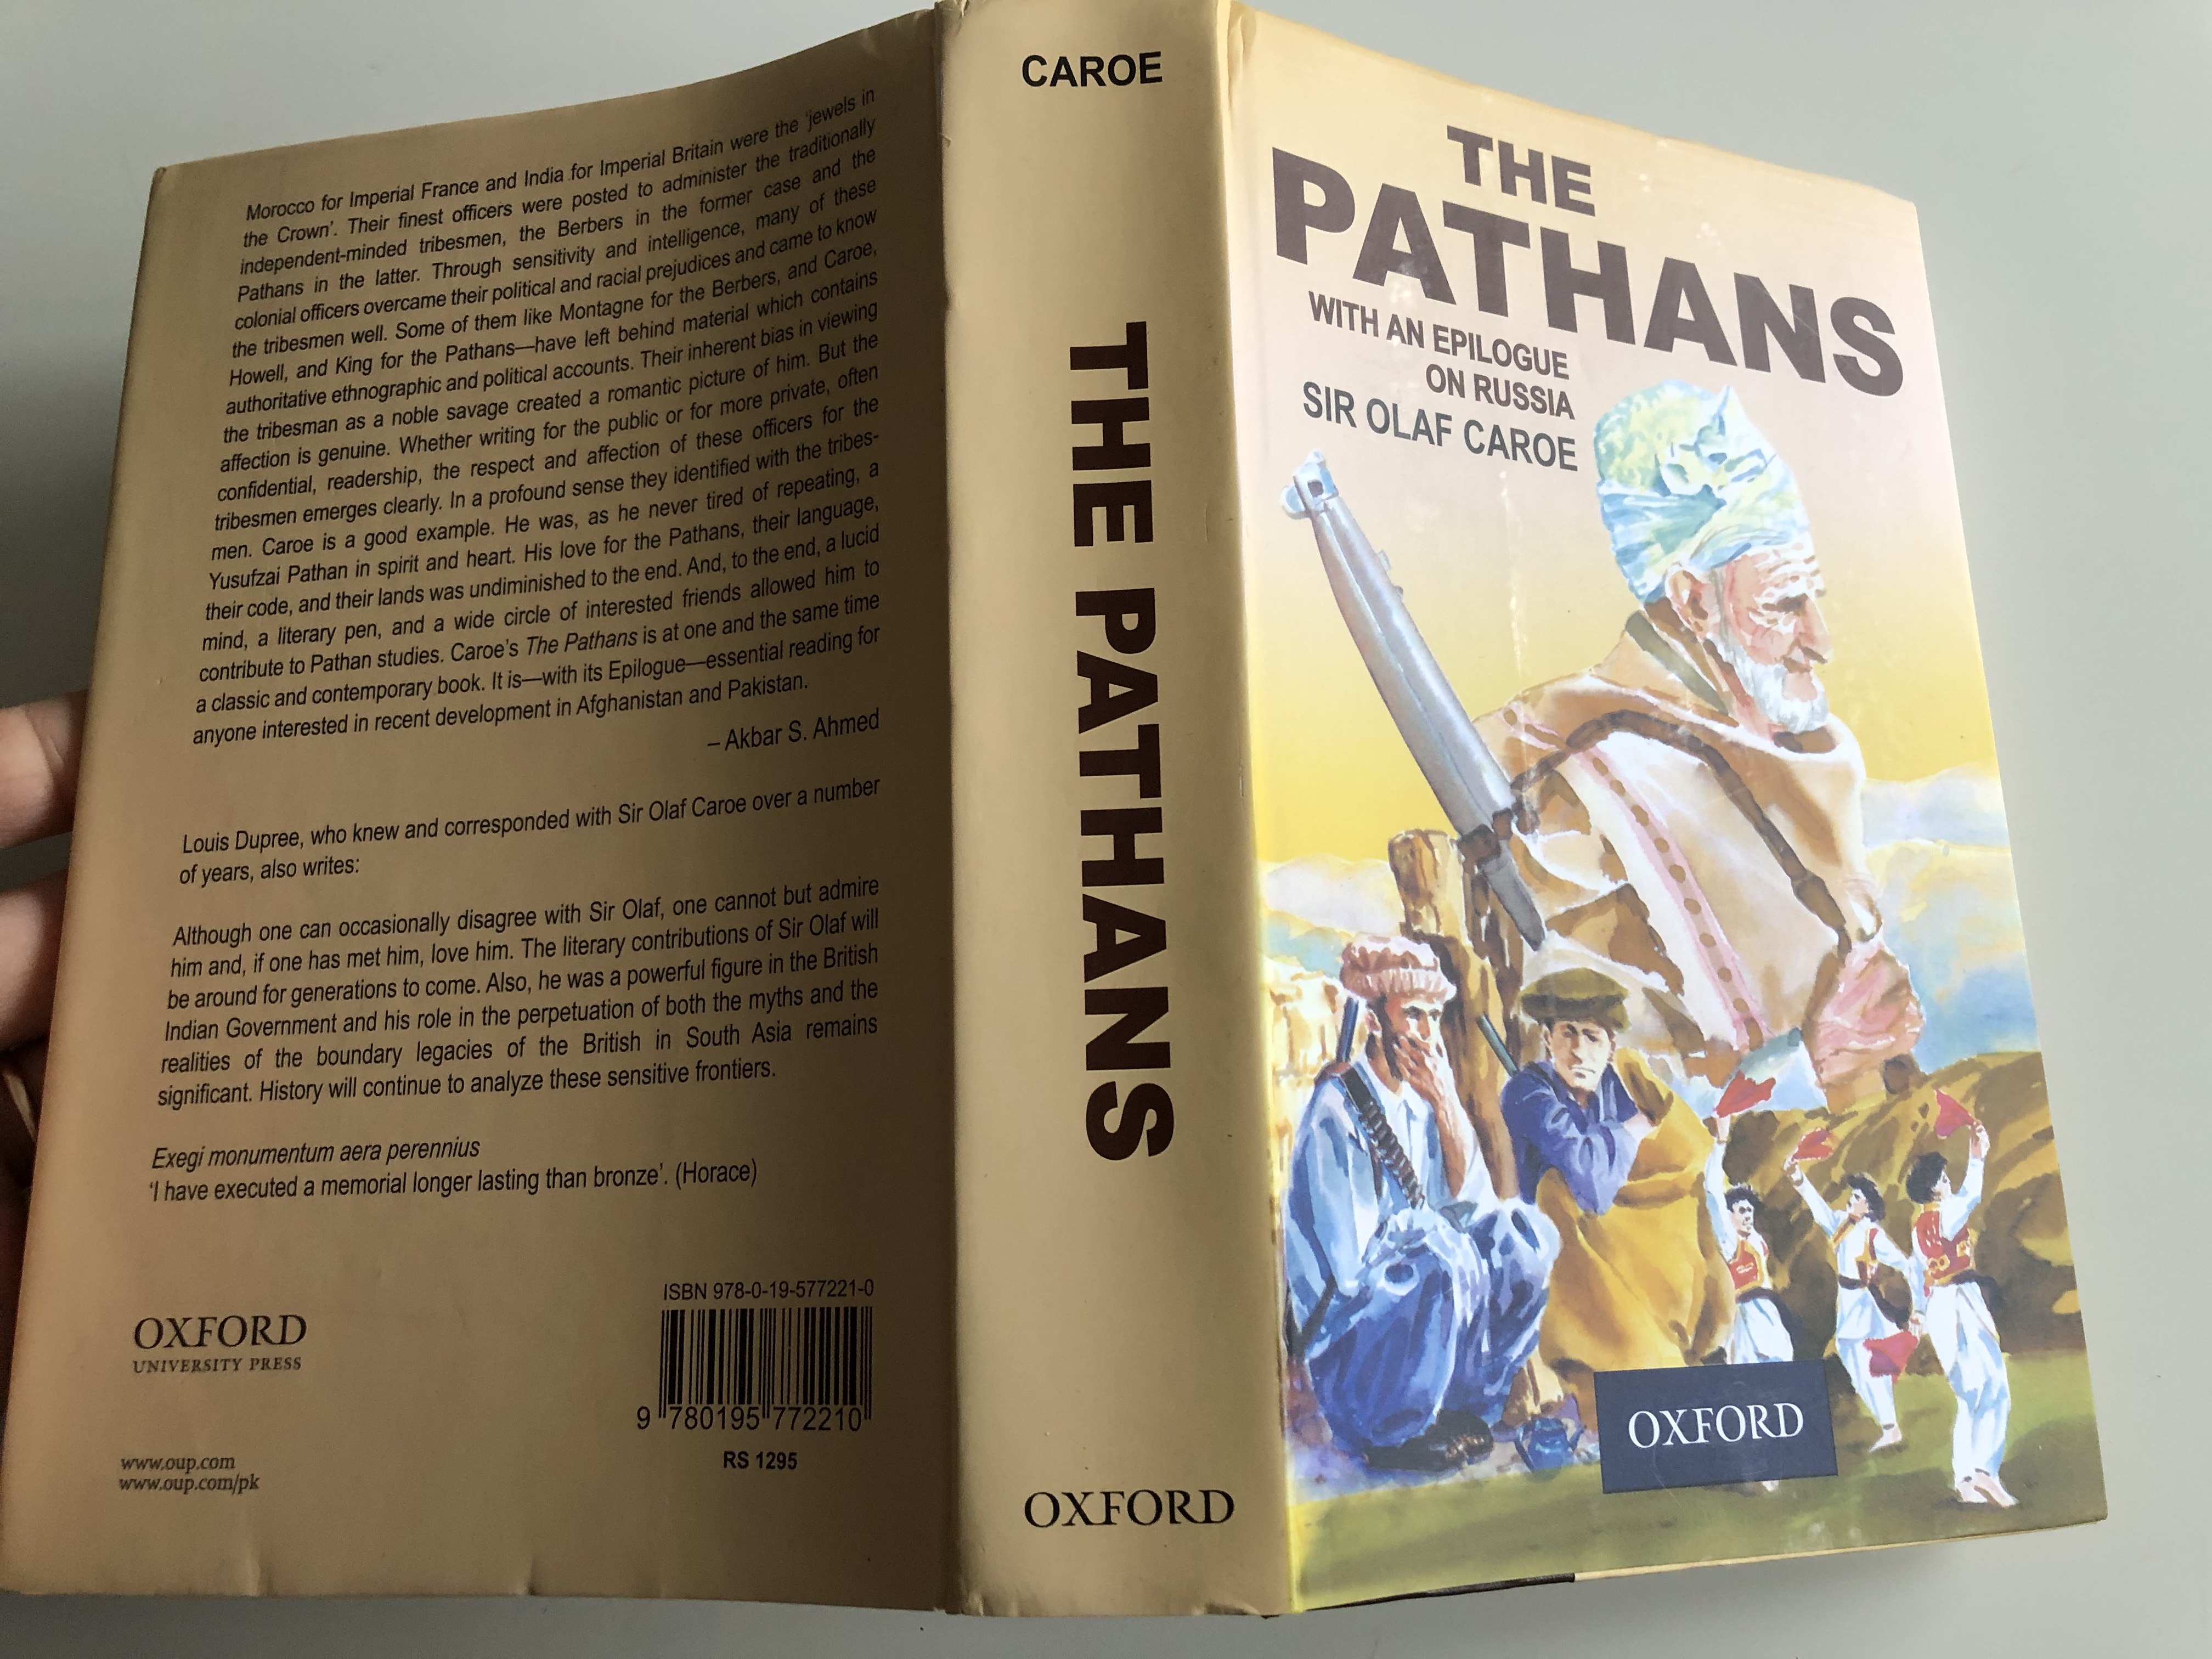 the-pathans-by-sir-olaf-caroe-with-an-epilogue-on-russia-oxford-in-asia-historical-reprints-24-.jpg